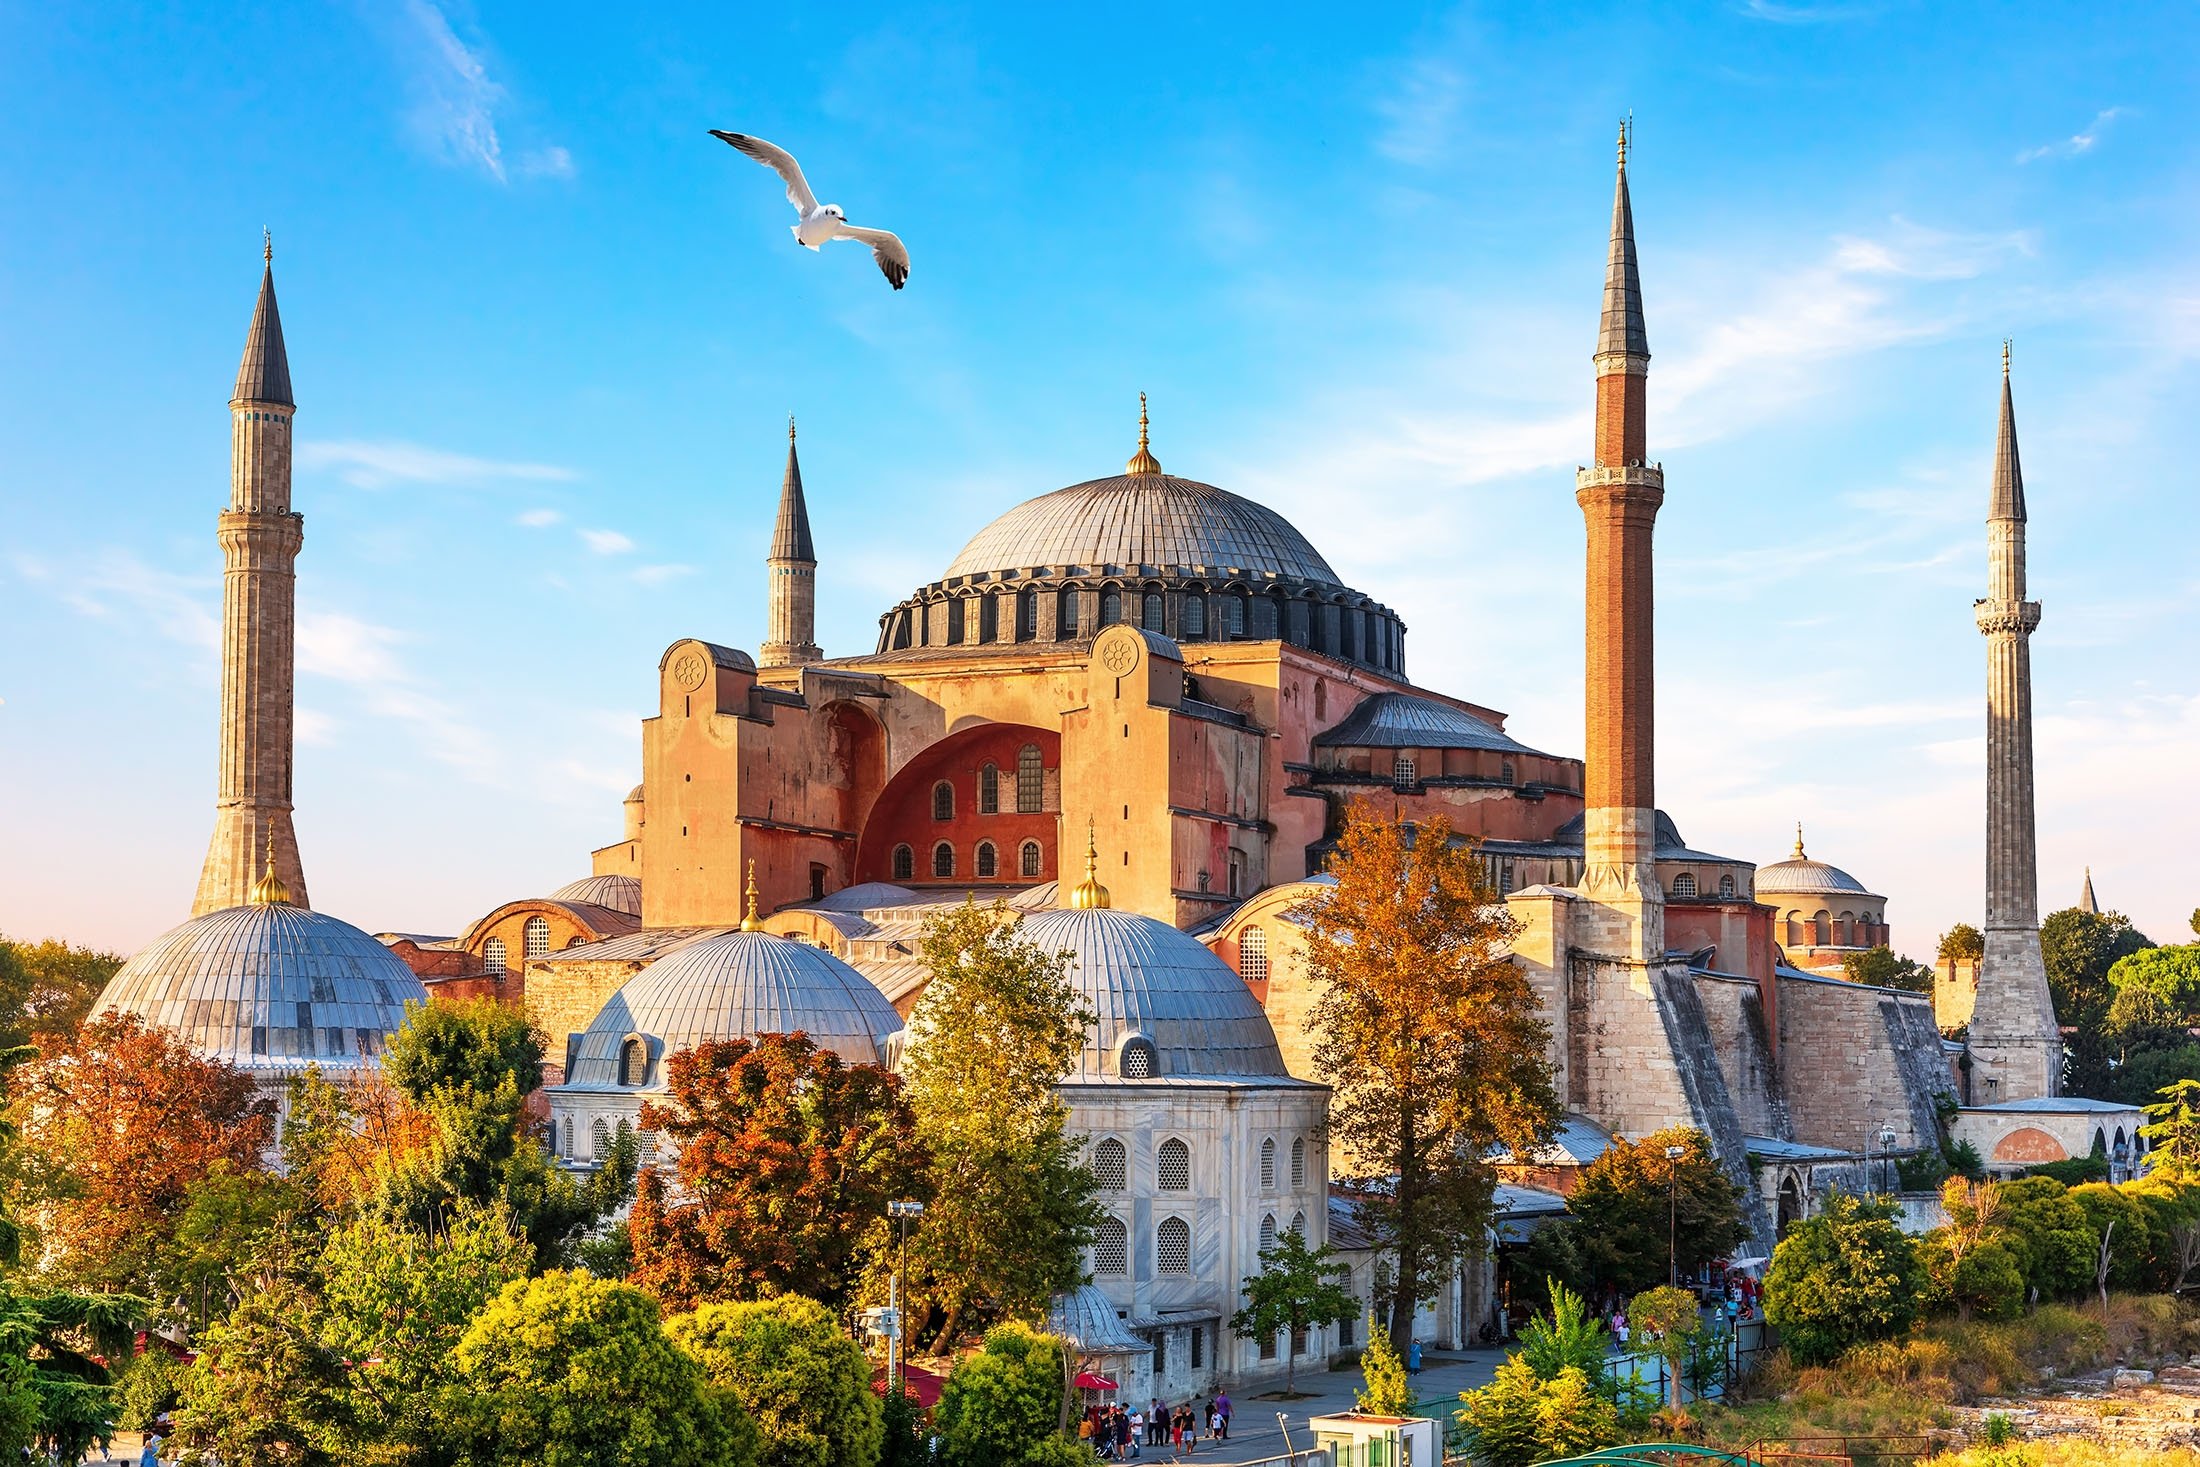 A seagull flies by the historical Hagia Sophia Mosque, in Istanbul, Turkey. (Shutterstock Photo)